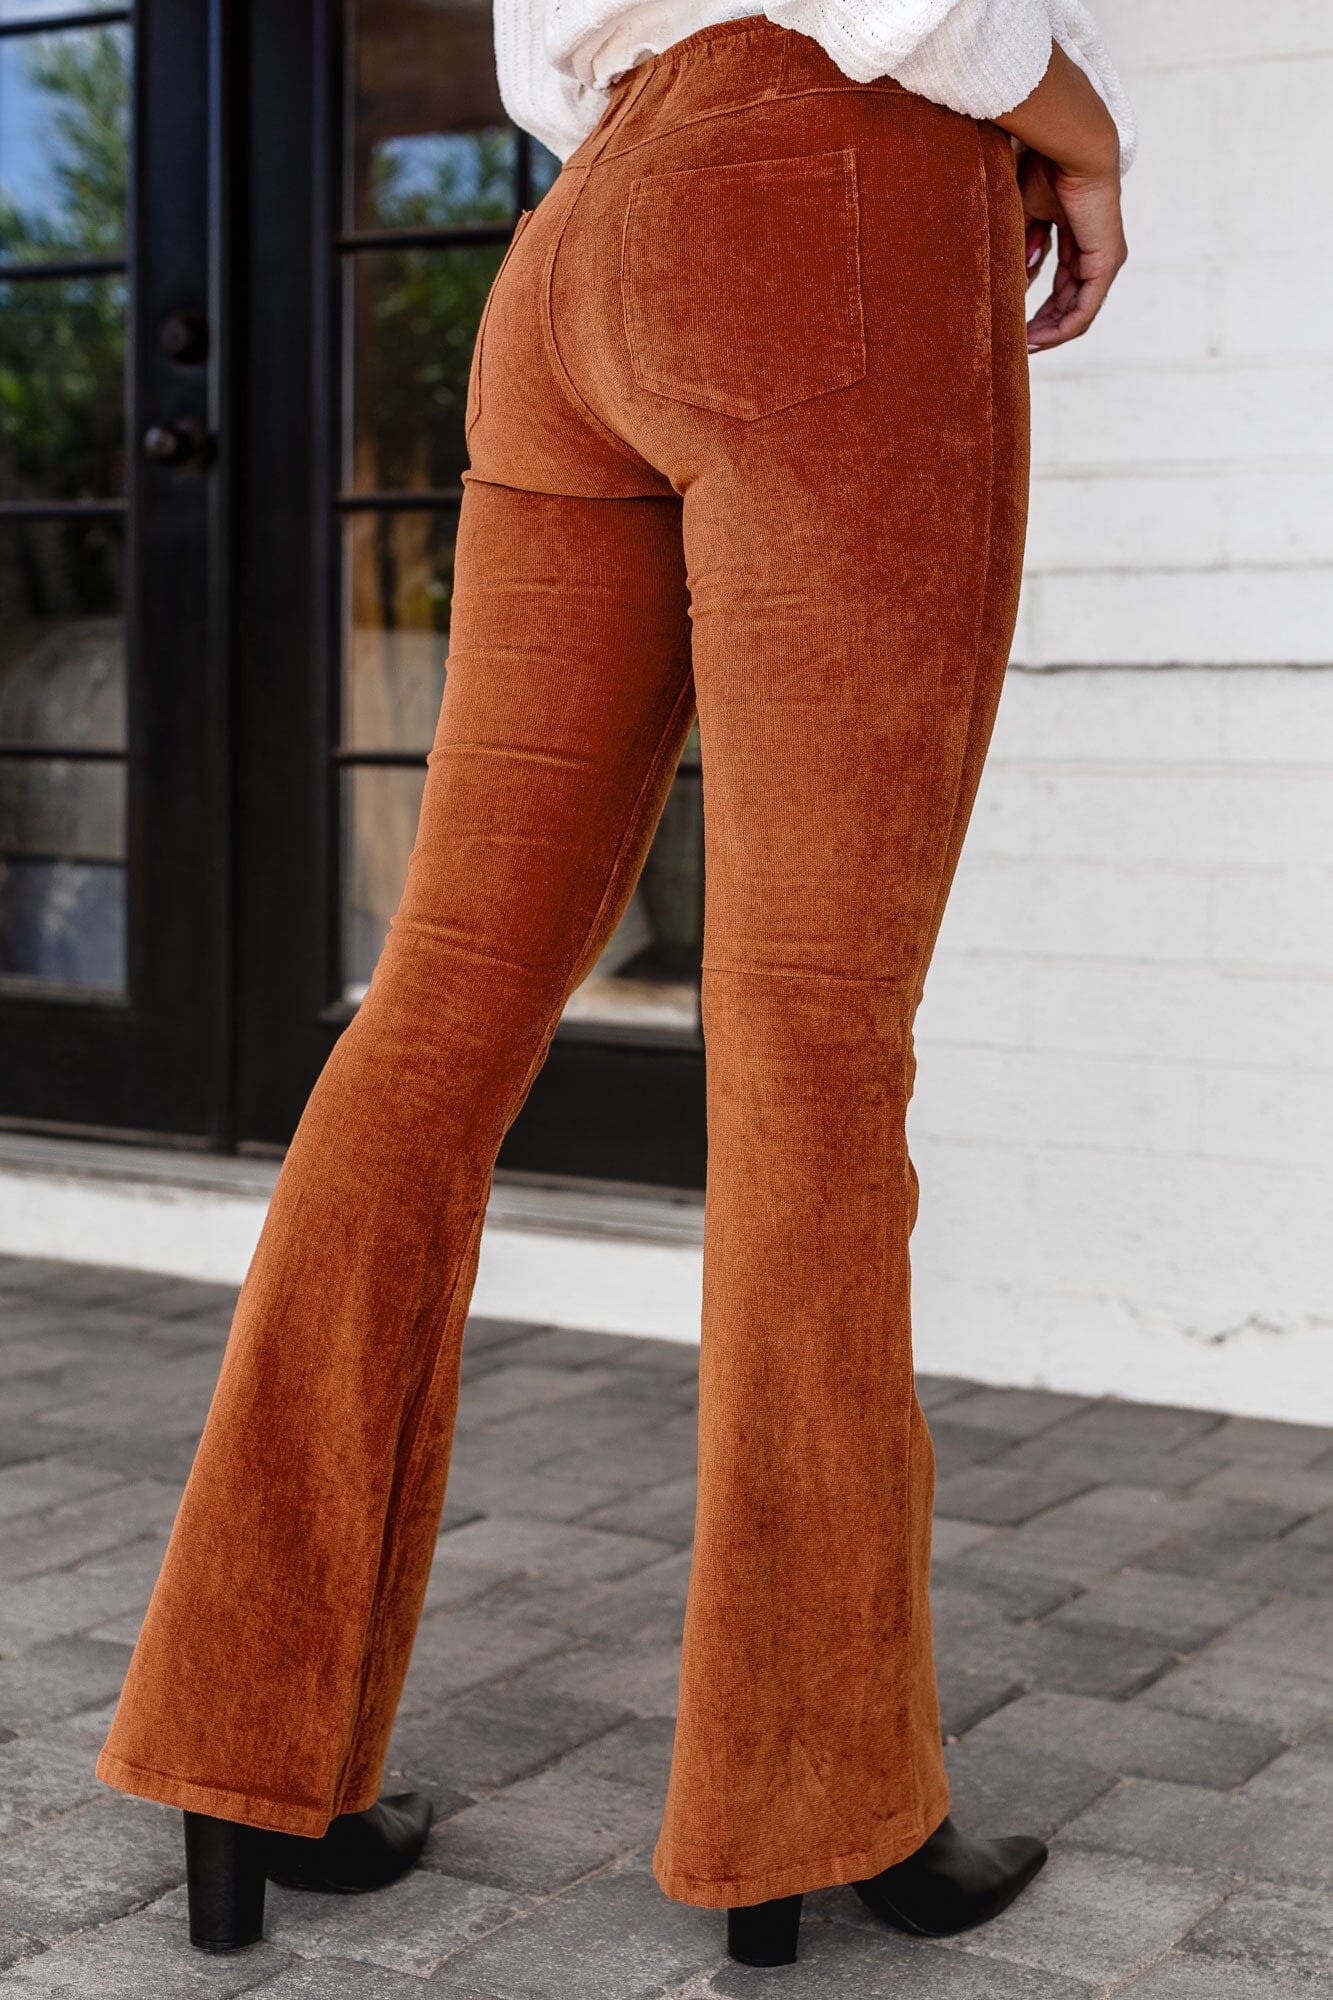 Women's Flare Pants Corduroy High Waisted Pants Bell Bottom Trousers